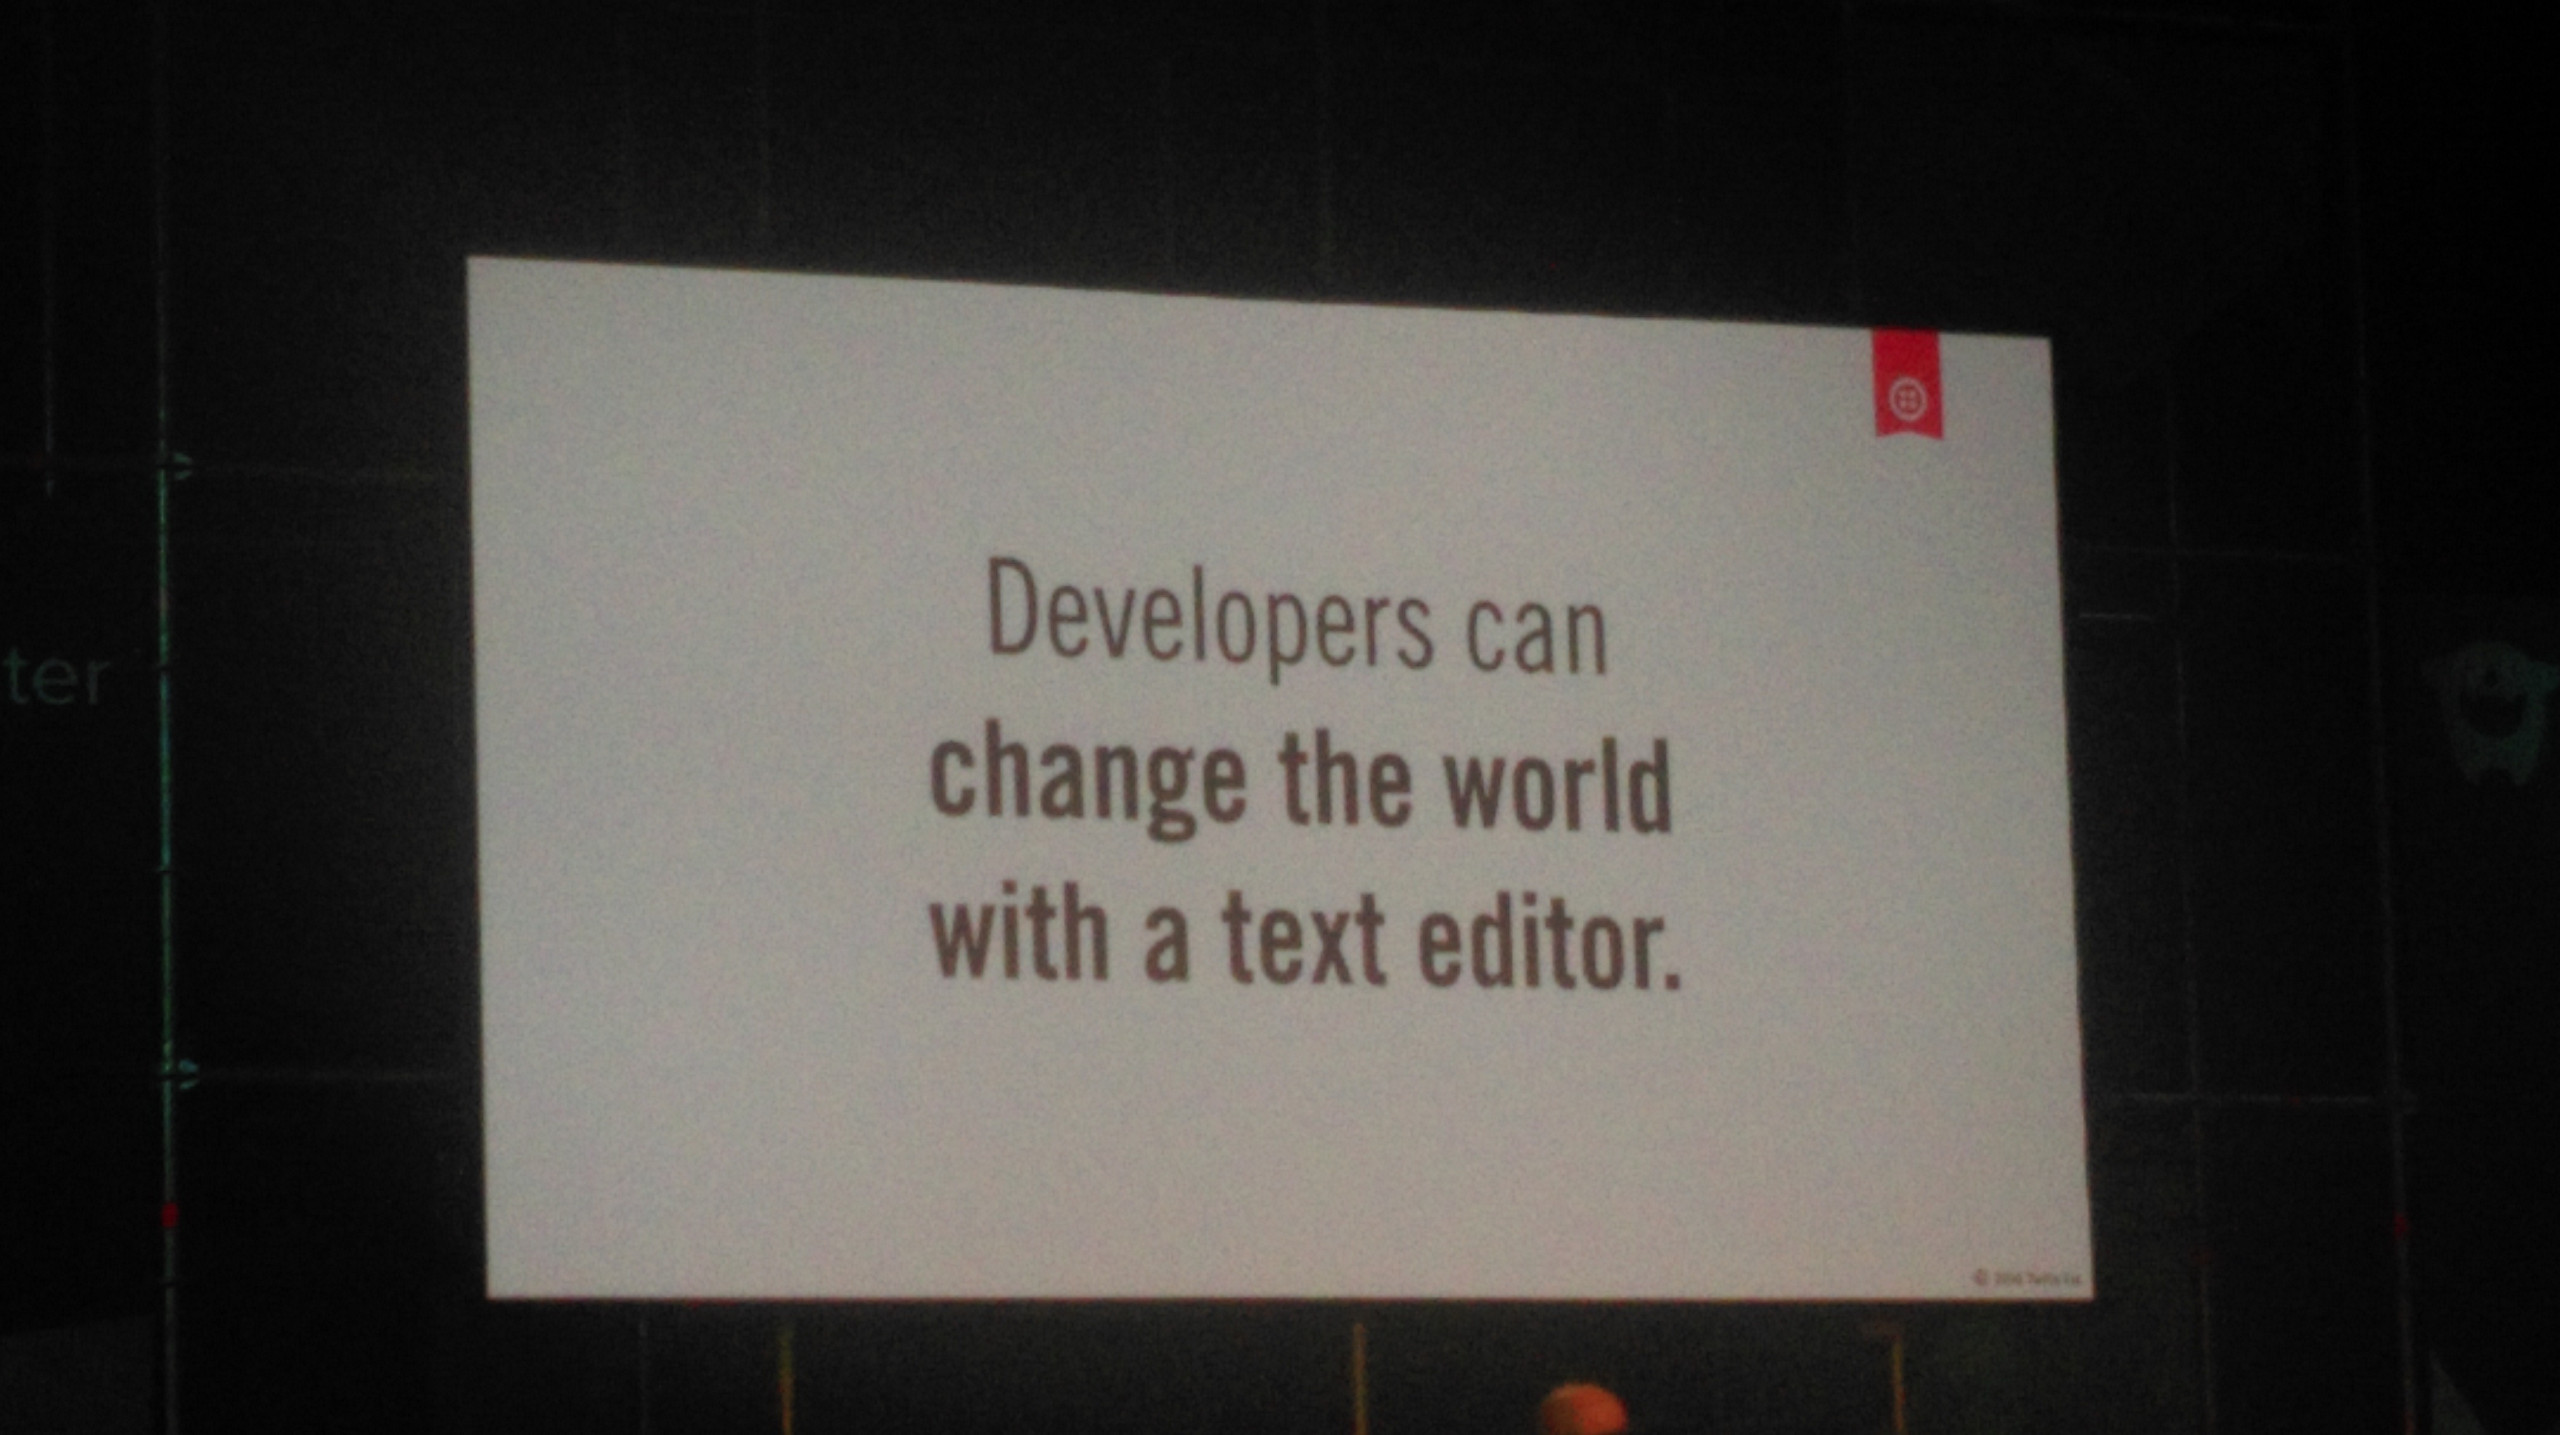 Websummit talk: Developers can change the world with a texteditor